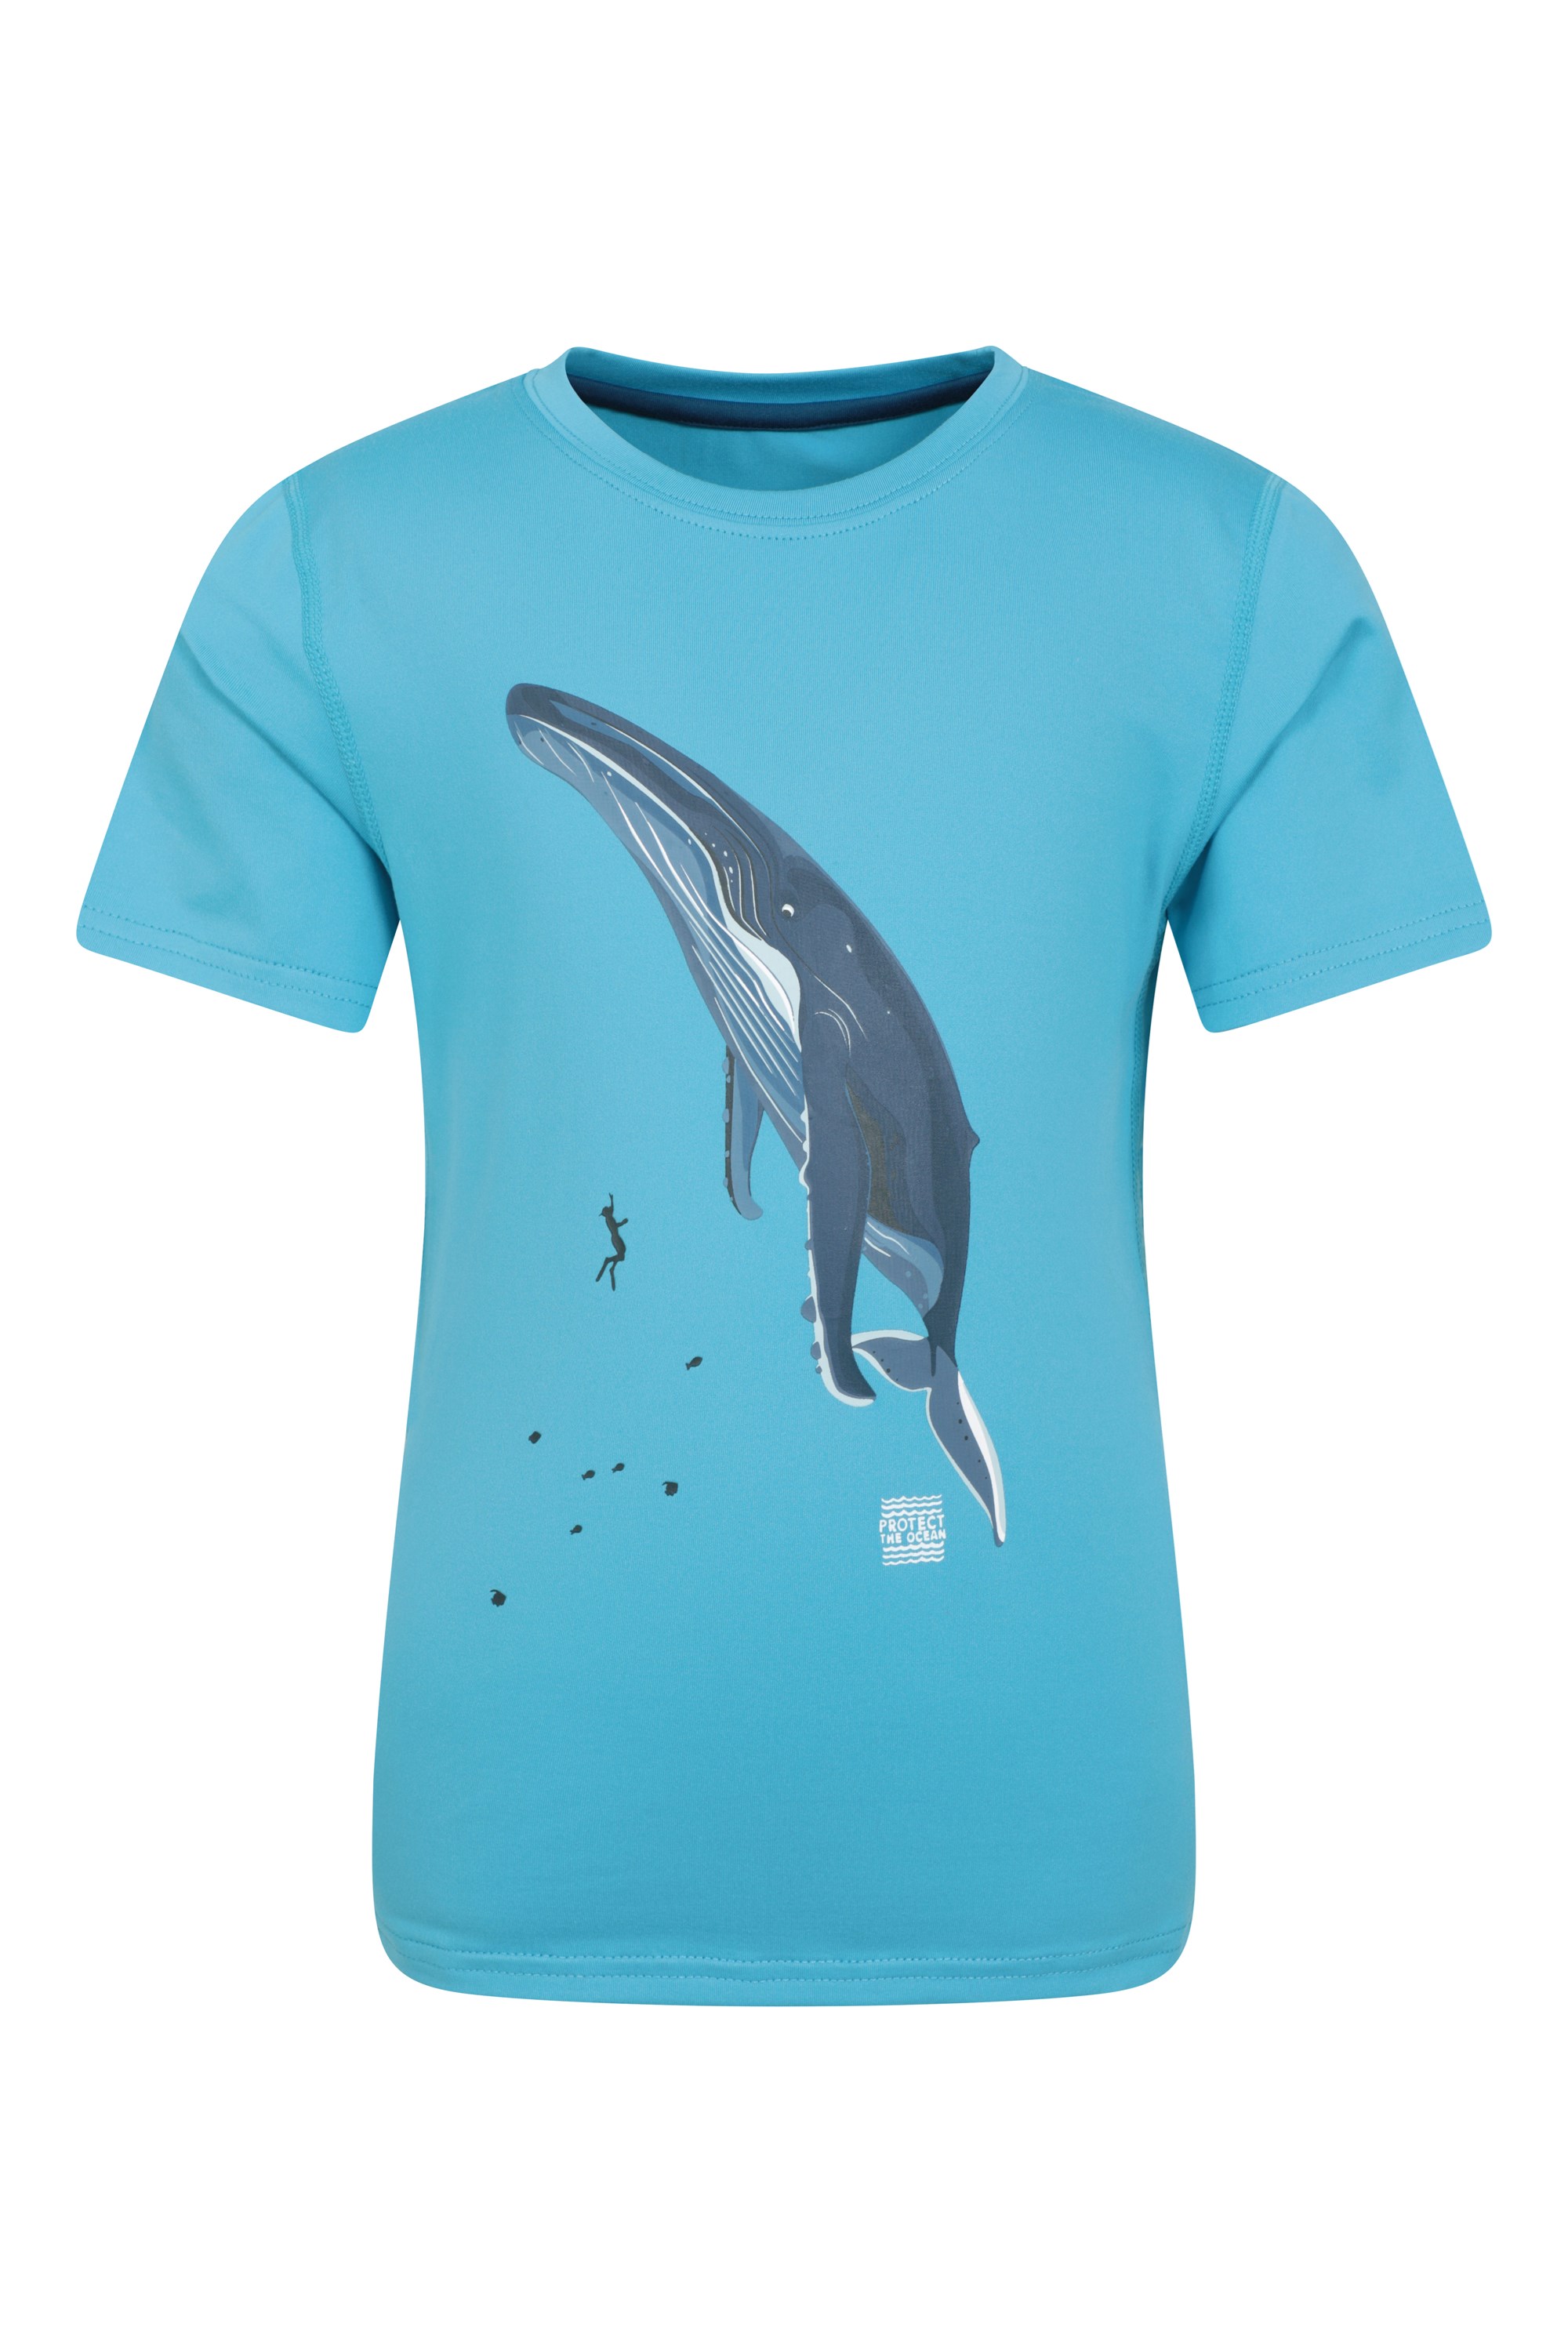 for Travelling Mountain Warehouse Glow in The Dark Sharks Kids Tee Camping Fun Design Lightweight Girls & Boys T-Shirt Breathable Top 